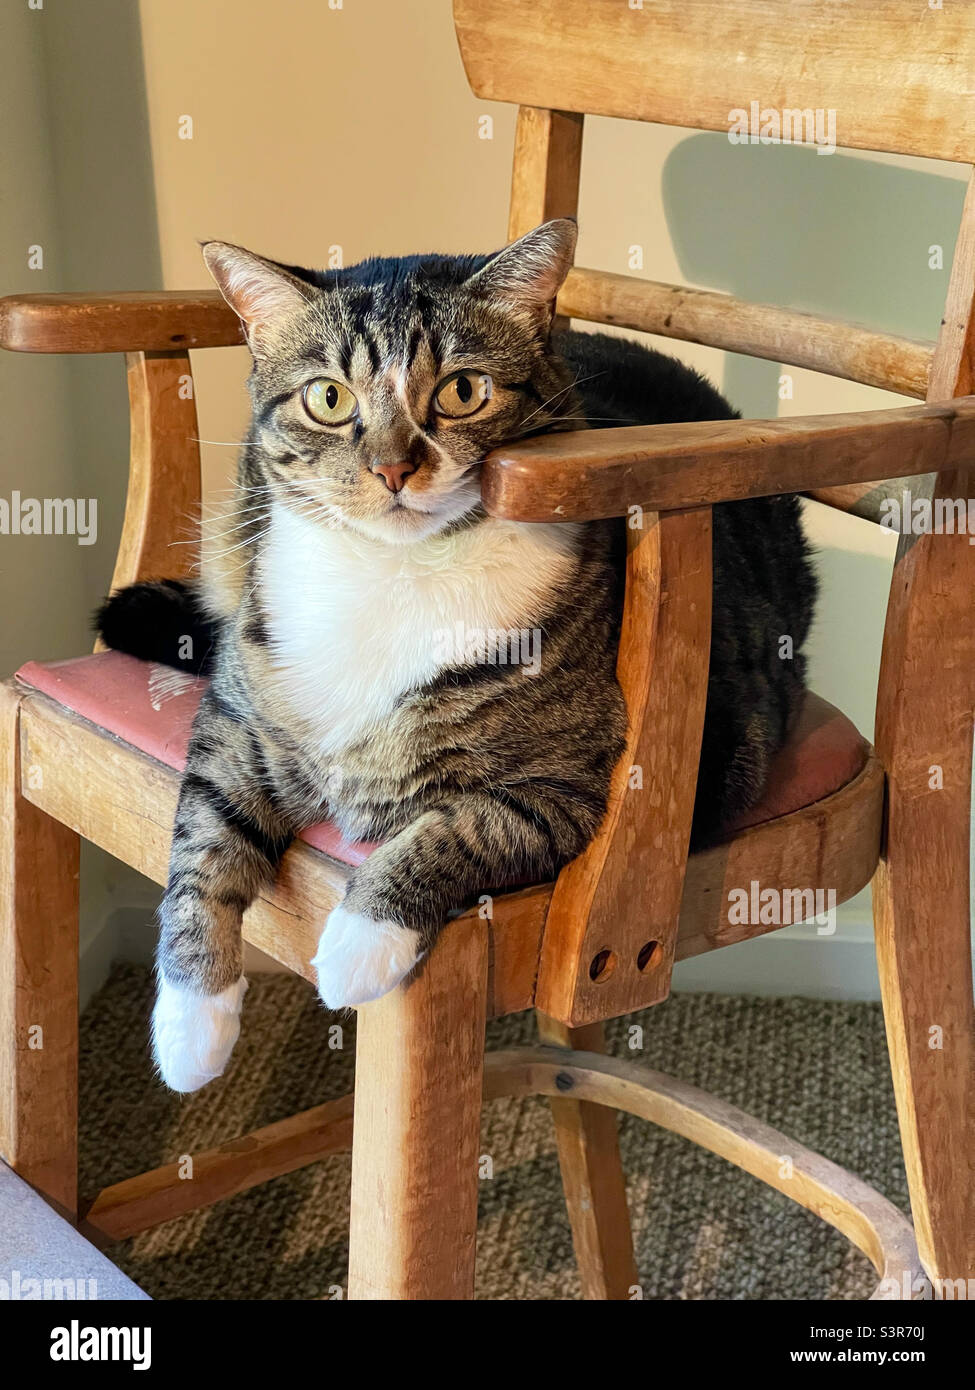 Beautiful domestic short haired female tabby cat lounging around in an antique wooden high chair. Stock Photo